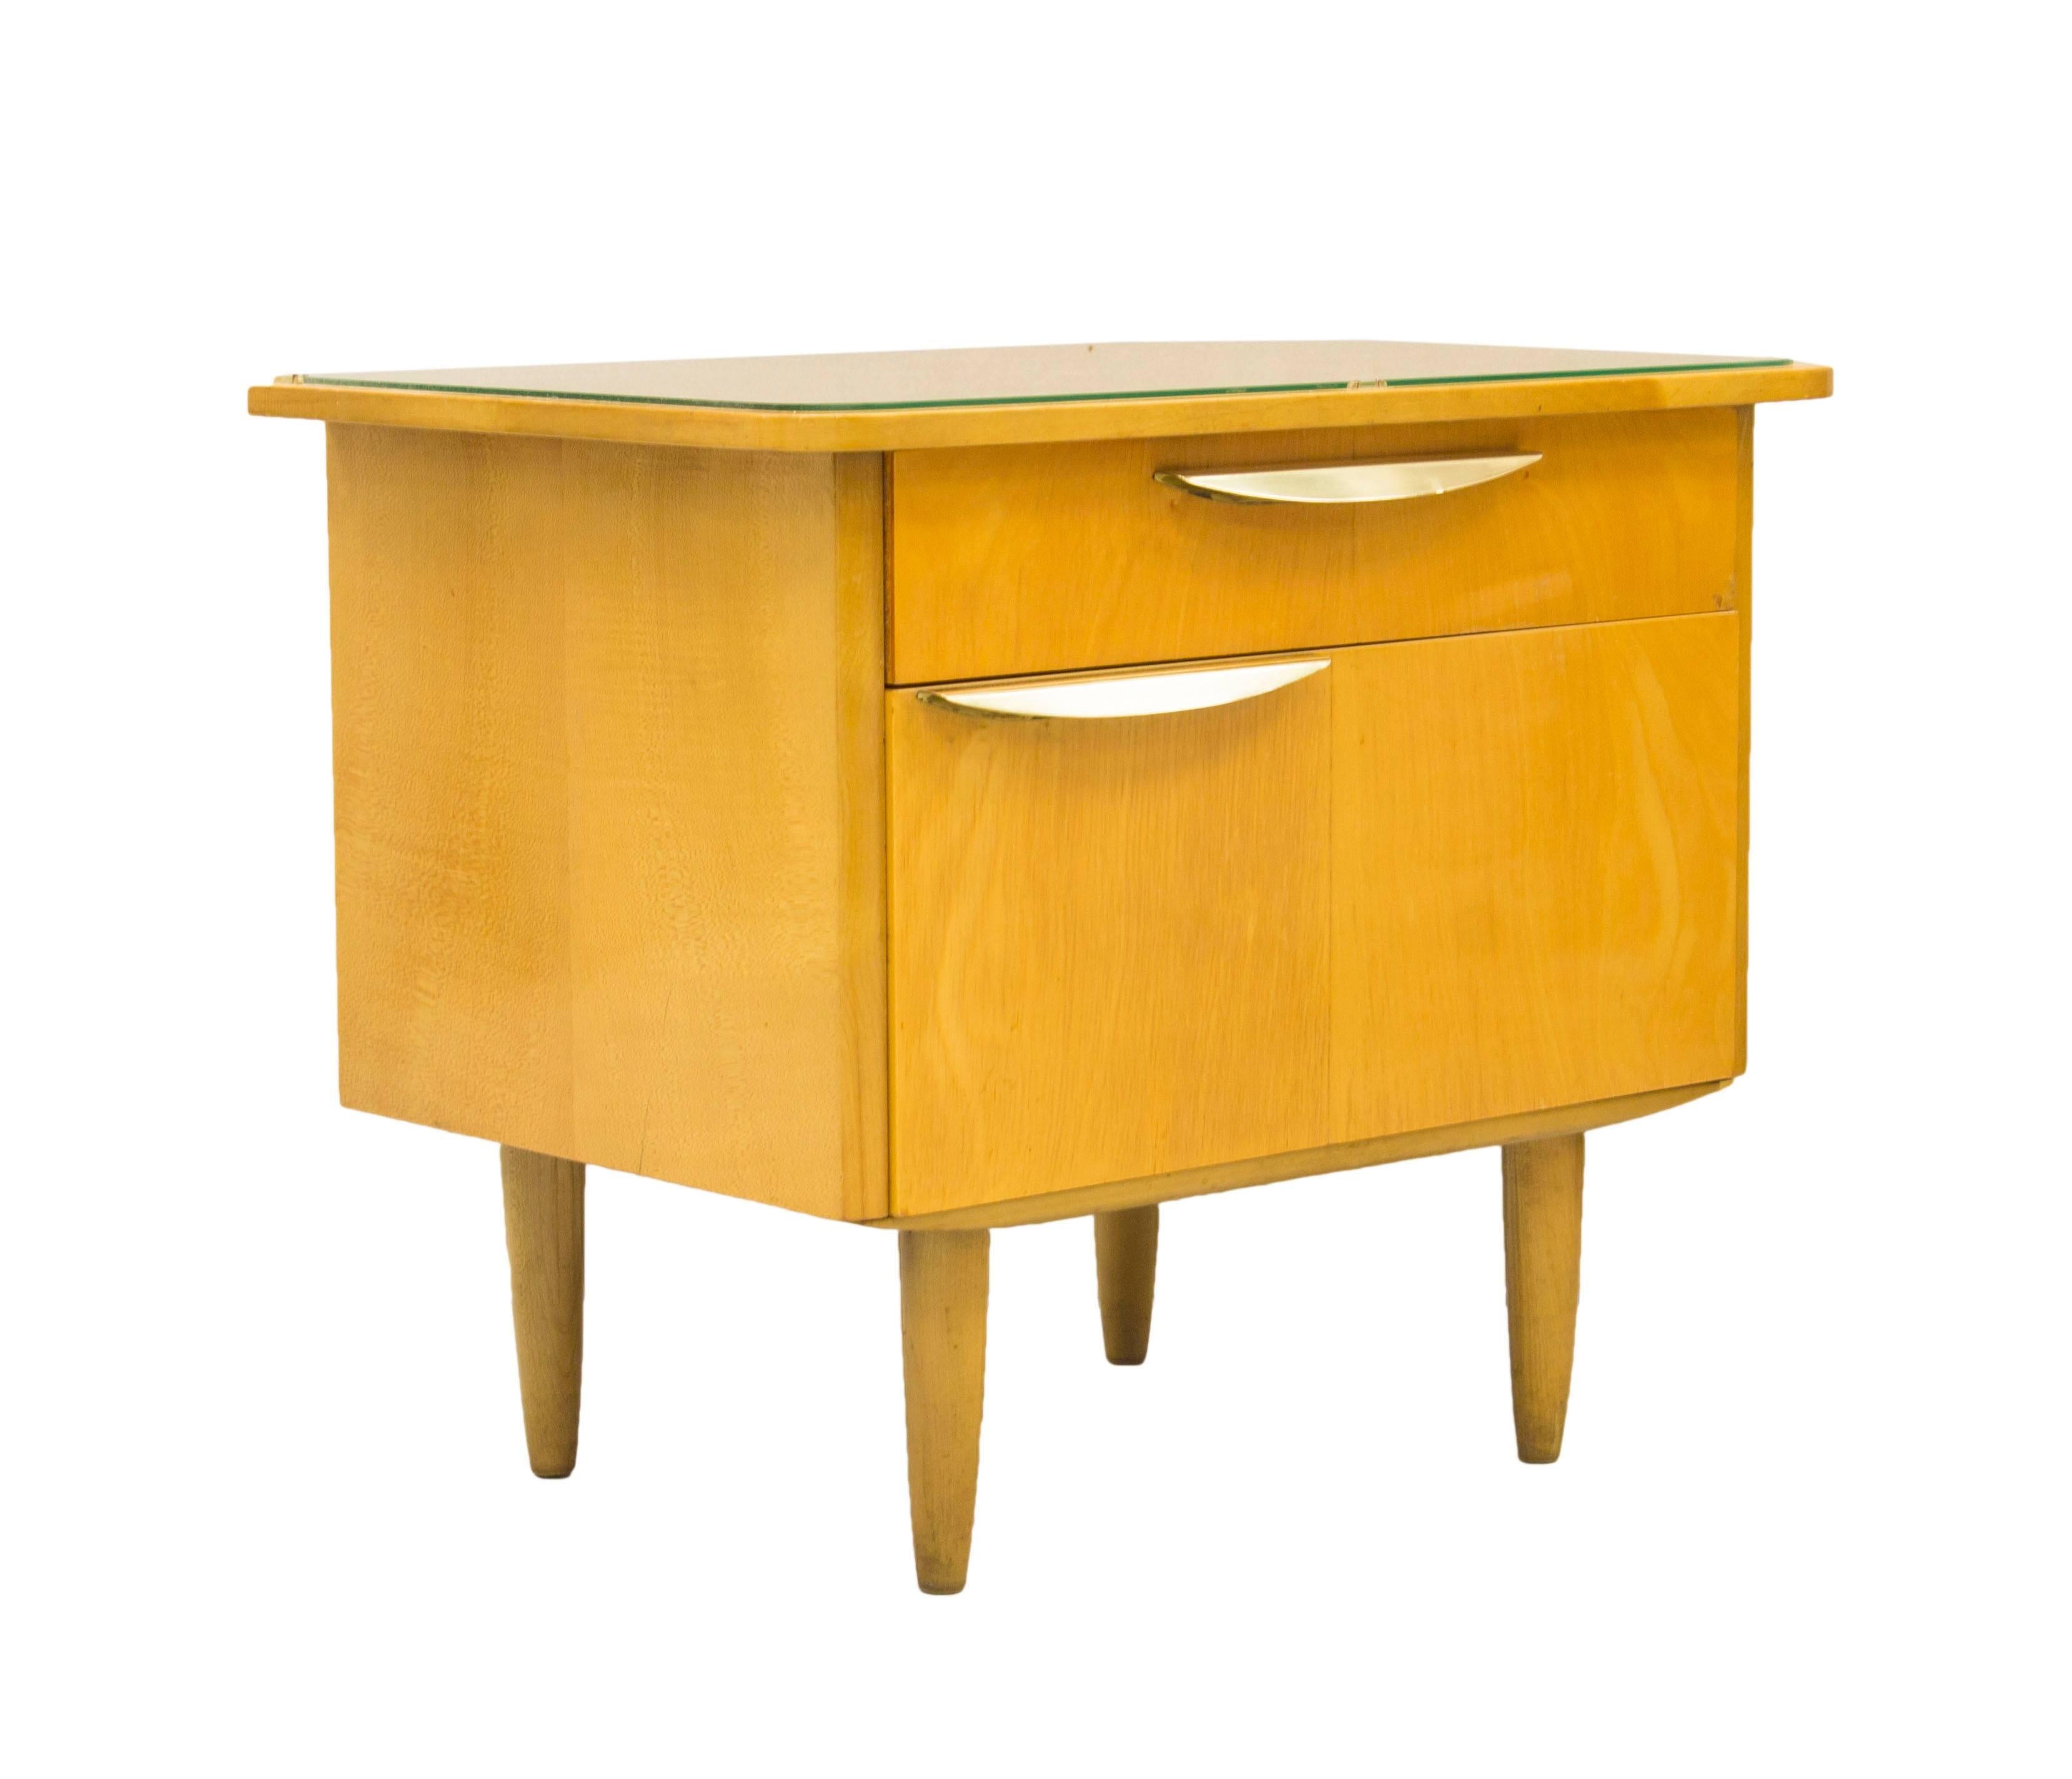 20th Century Pair of Italian Mid-Century Sycamore Bedside Tables Gloss